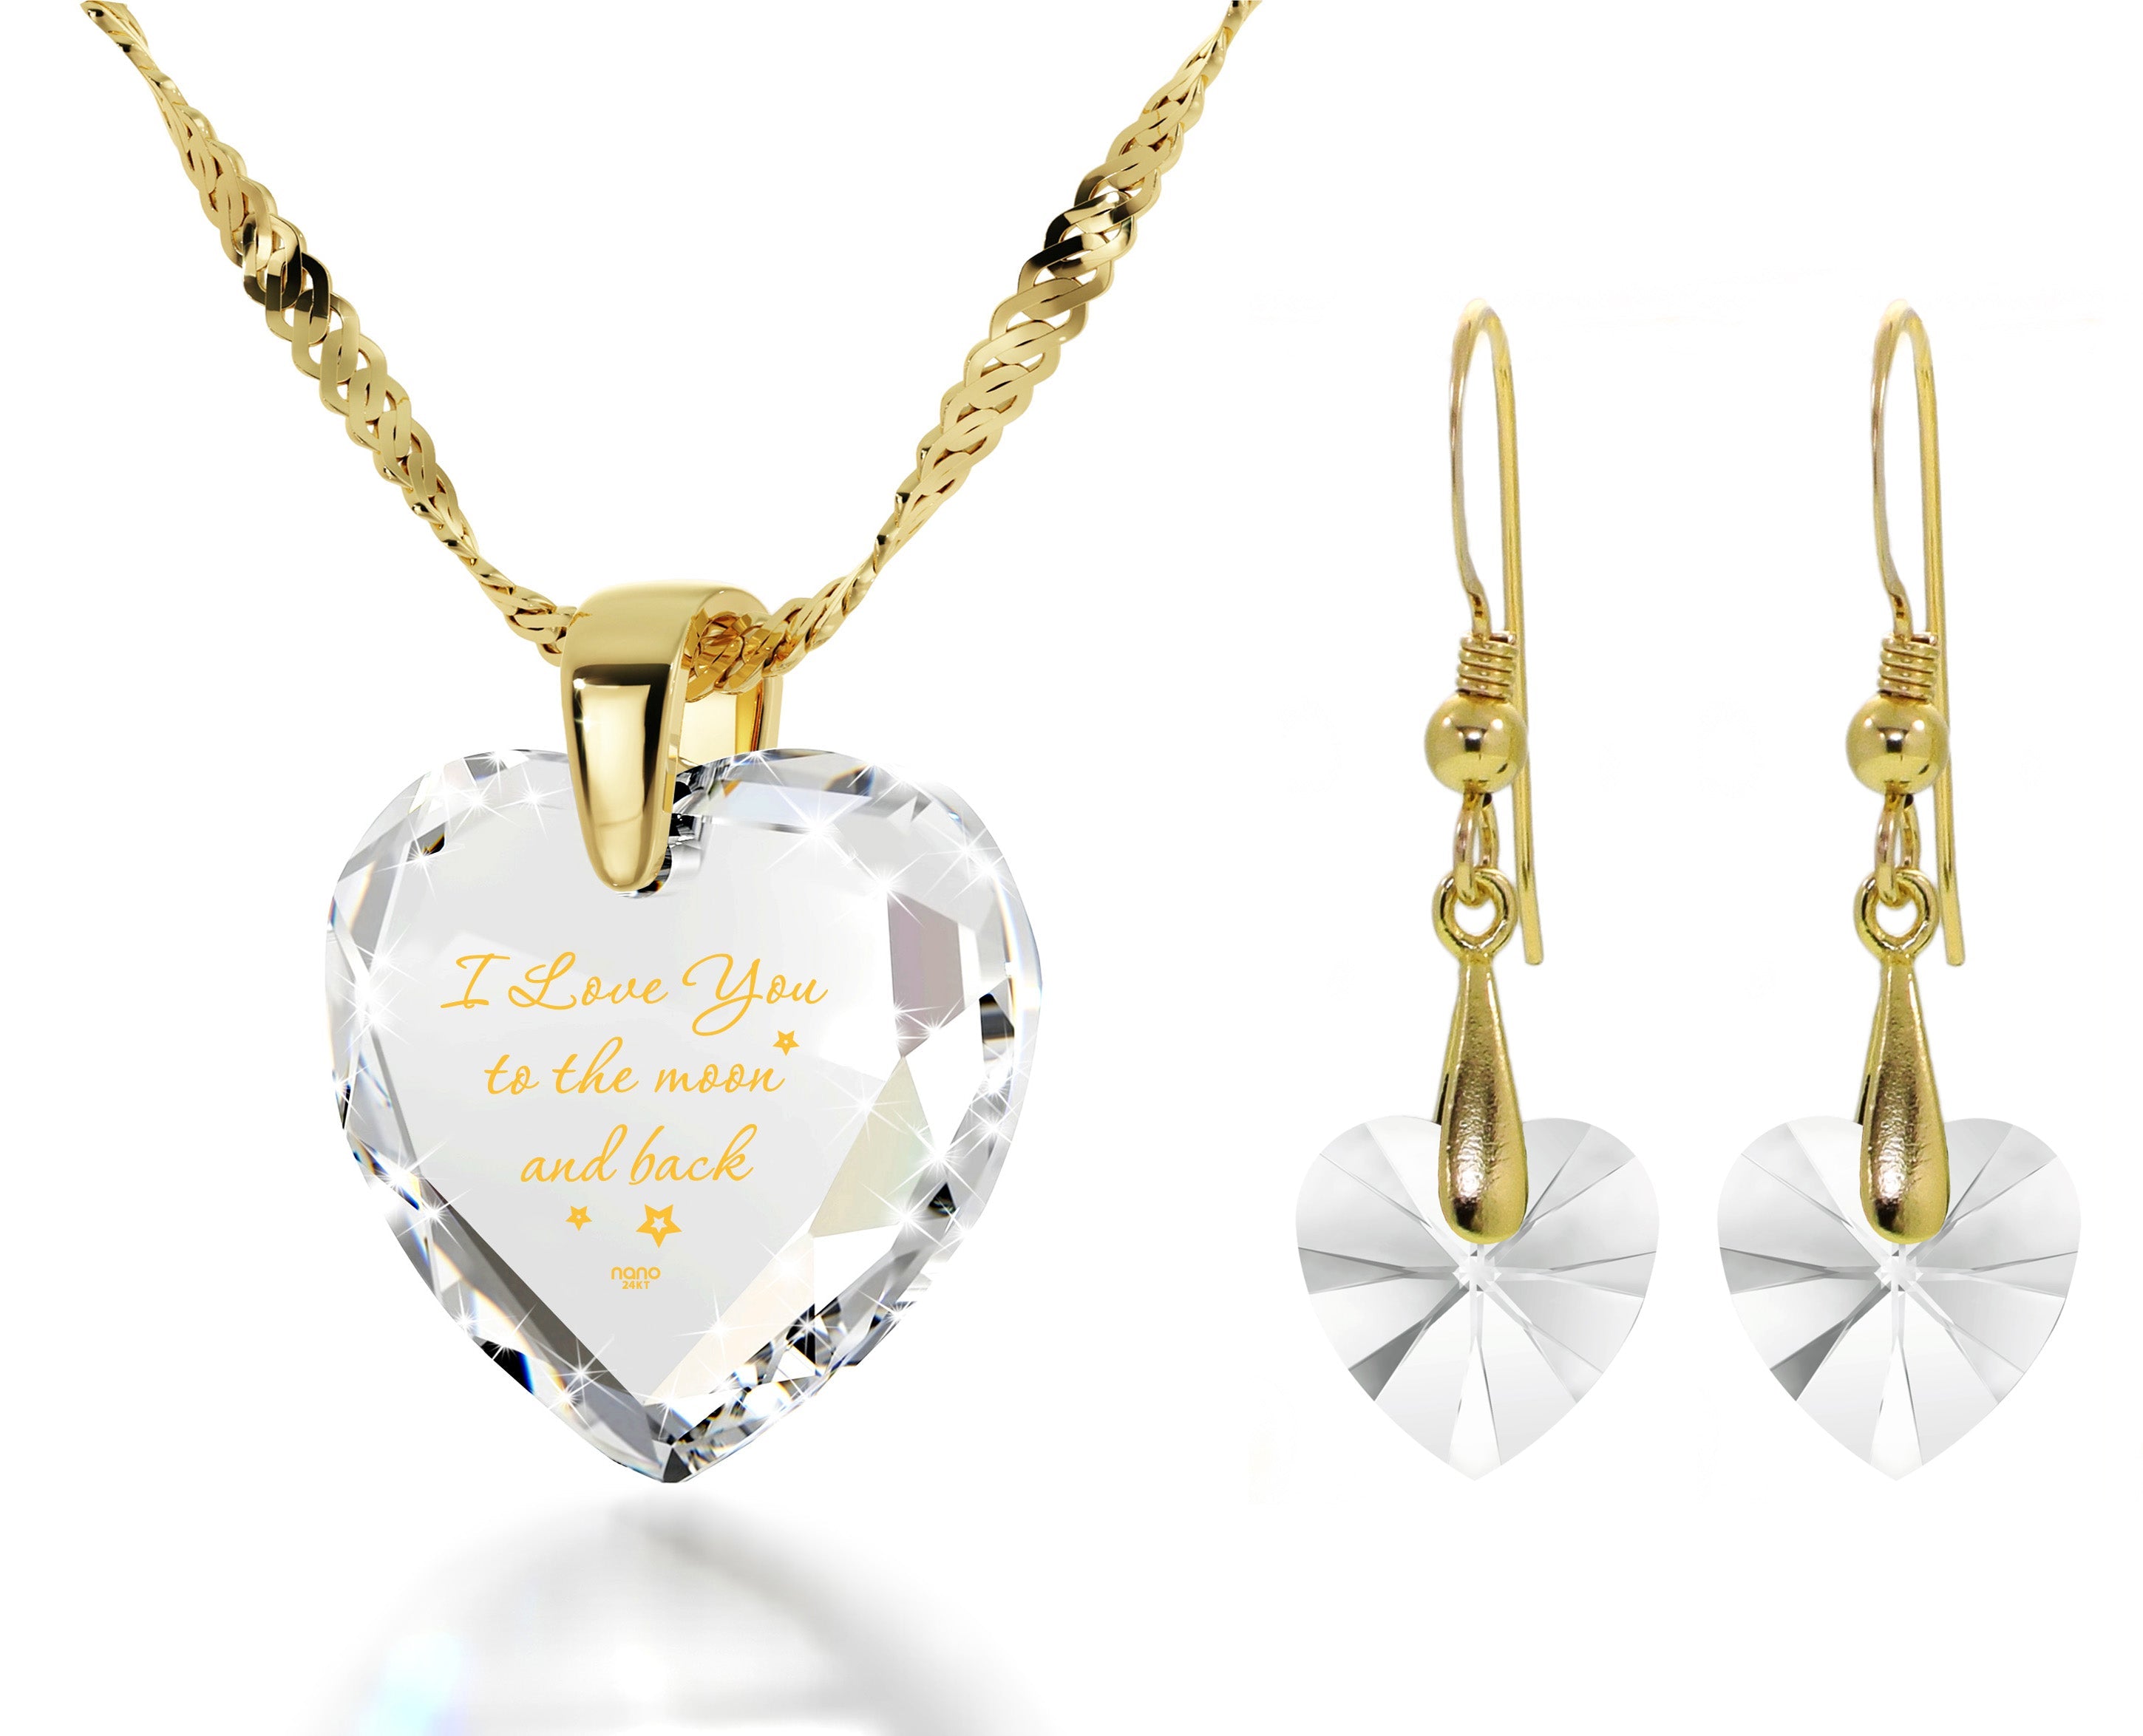 Heart-shaped pendant with the inscription "I Love You to the Moon and Back Necklace 24k Gold Inscribed" in gold script, set against a sparkling cubic zirconia background.